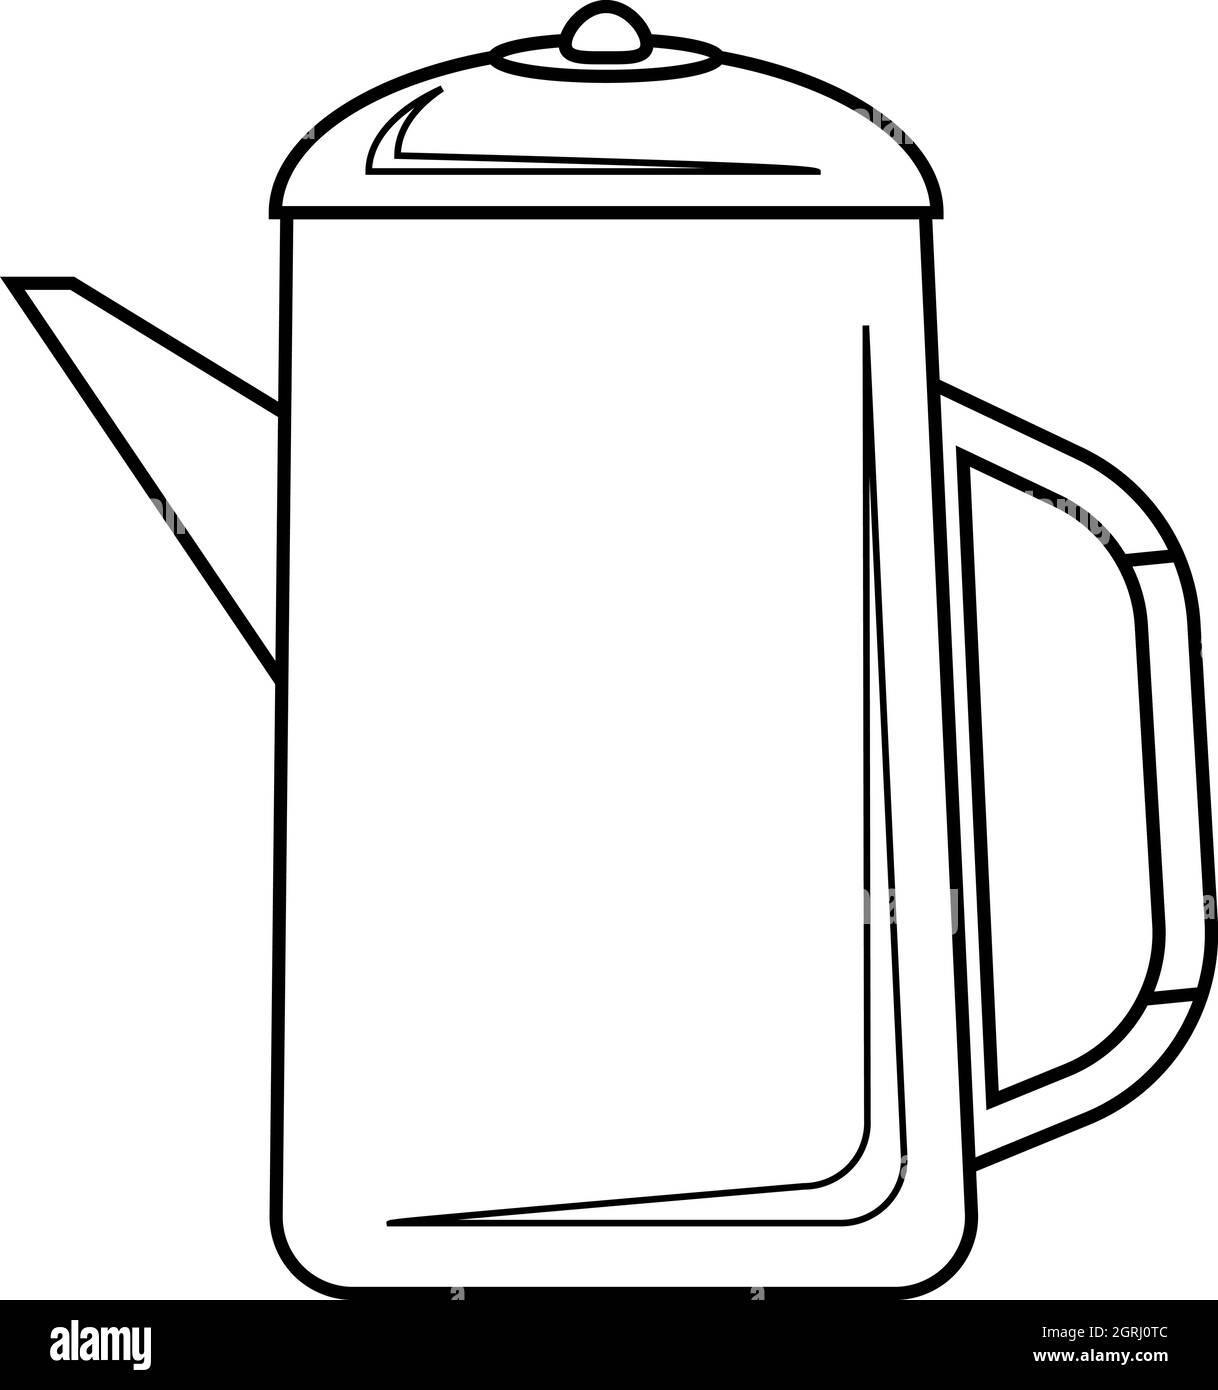 Metal kettle icon, outline style Stock Vector